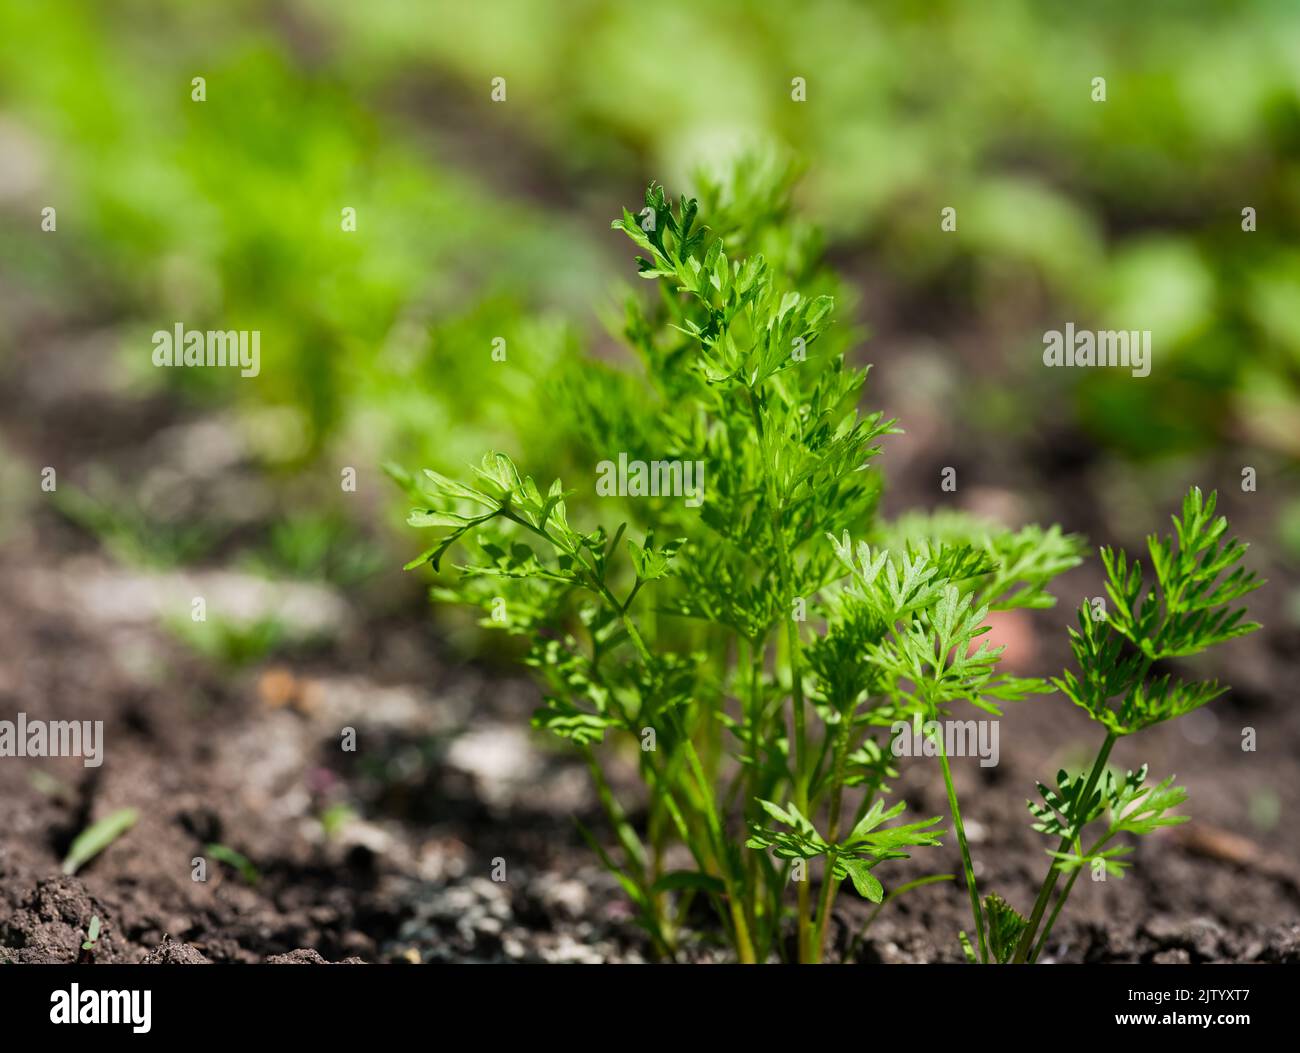 A close-up shot of fresh young carrot plants growing in a vegetable garden Stock Photo